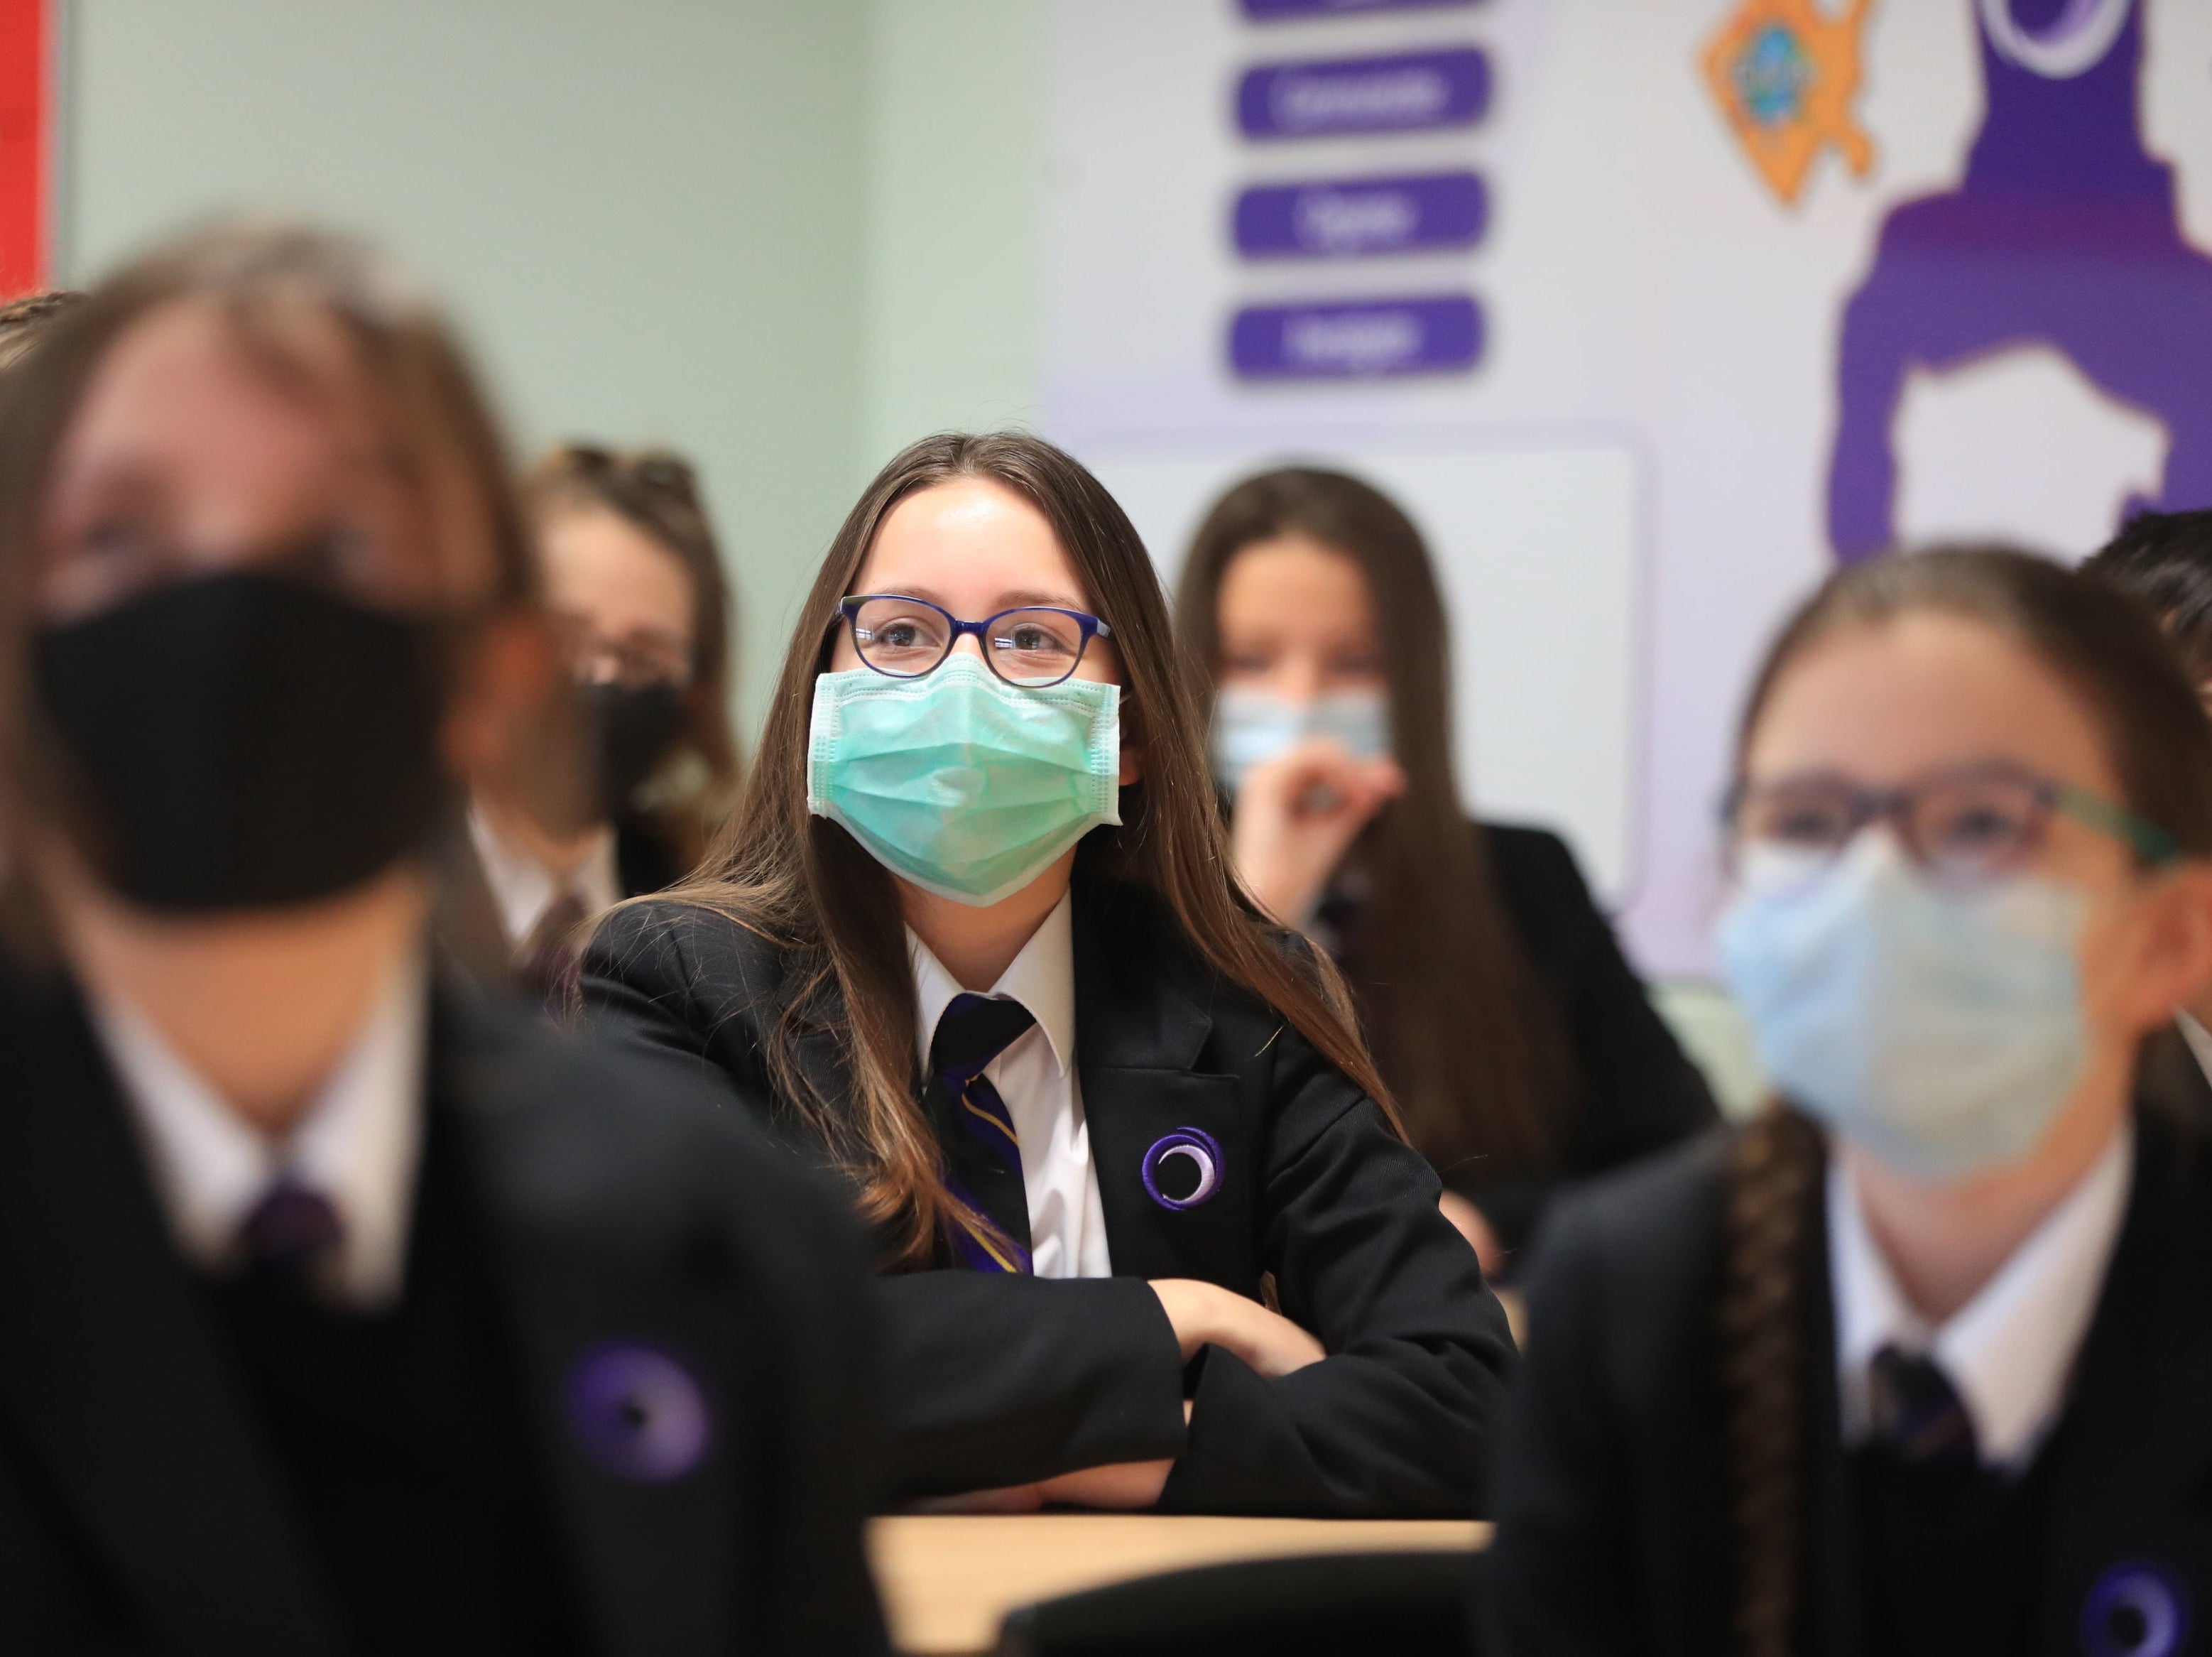 Air purifiers and ultraviolet lights are to be trialled in schools in a bid to combat Covid-19, according to reports.